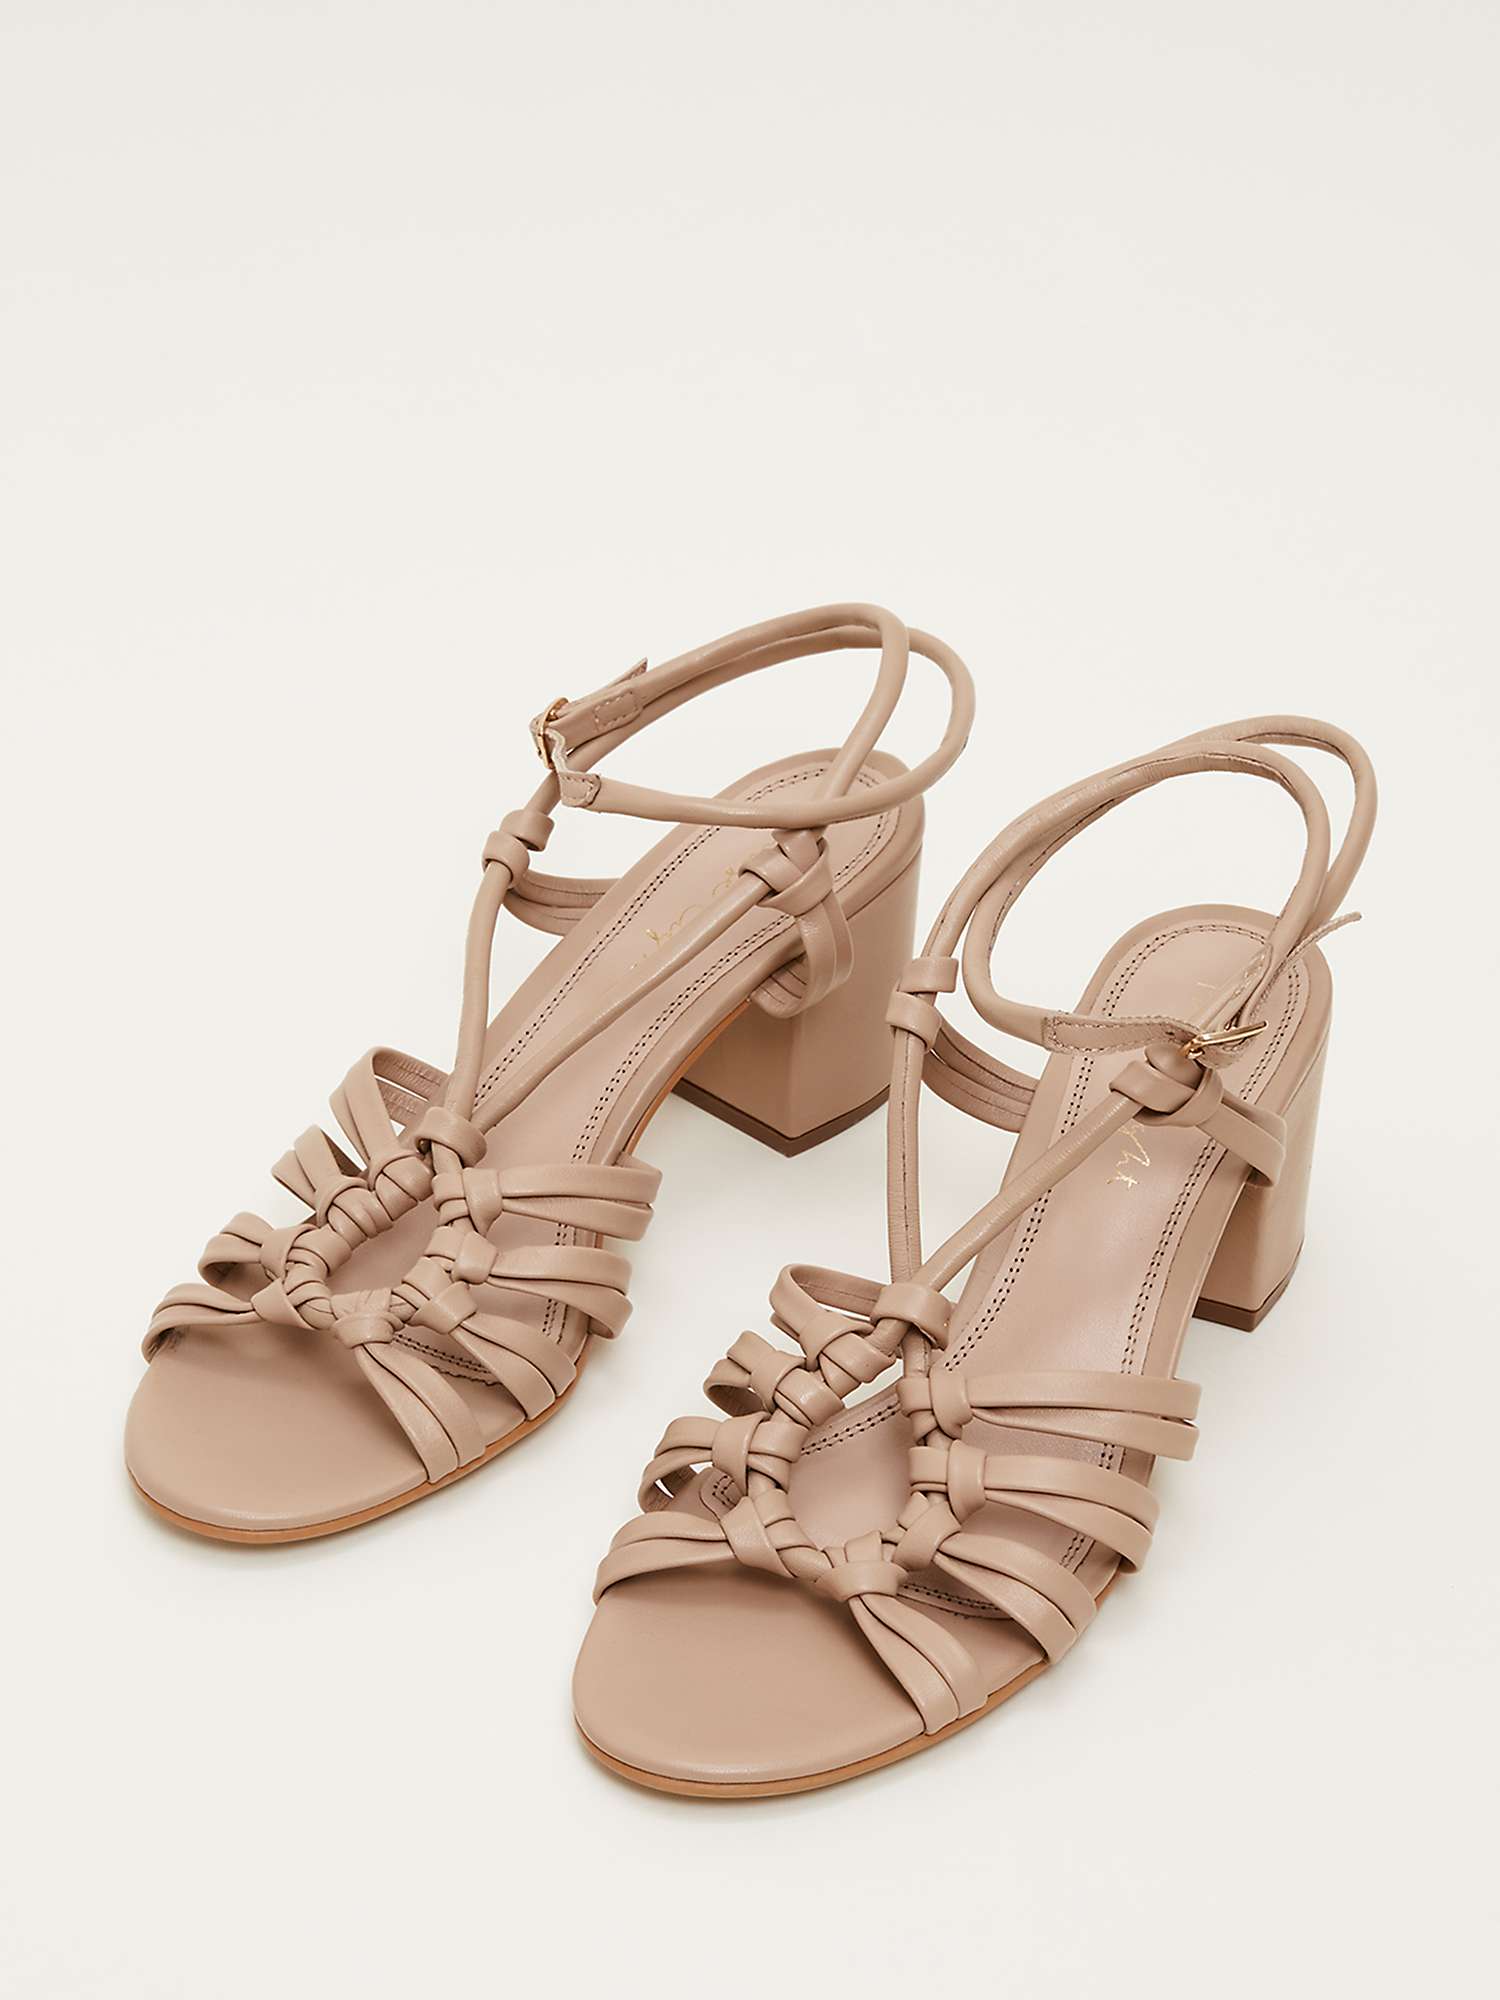 Buy Phase Eight Leather Ankle Strap Sandals, Tan Online at johnlewis.com